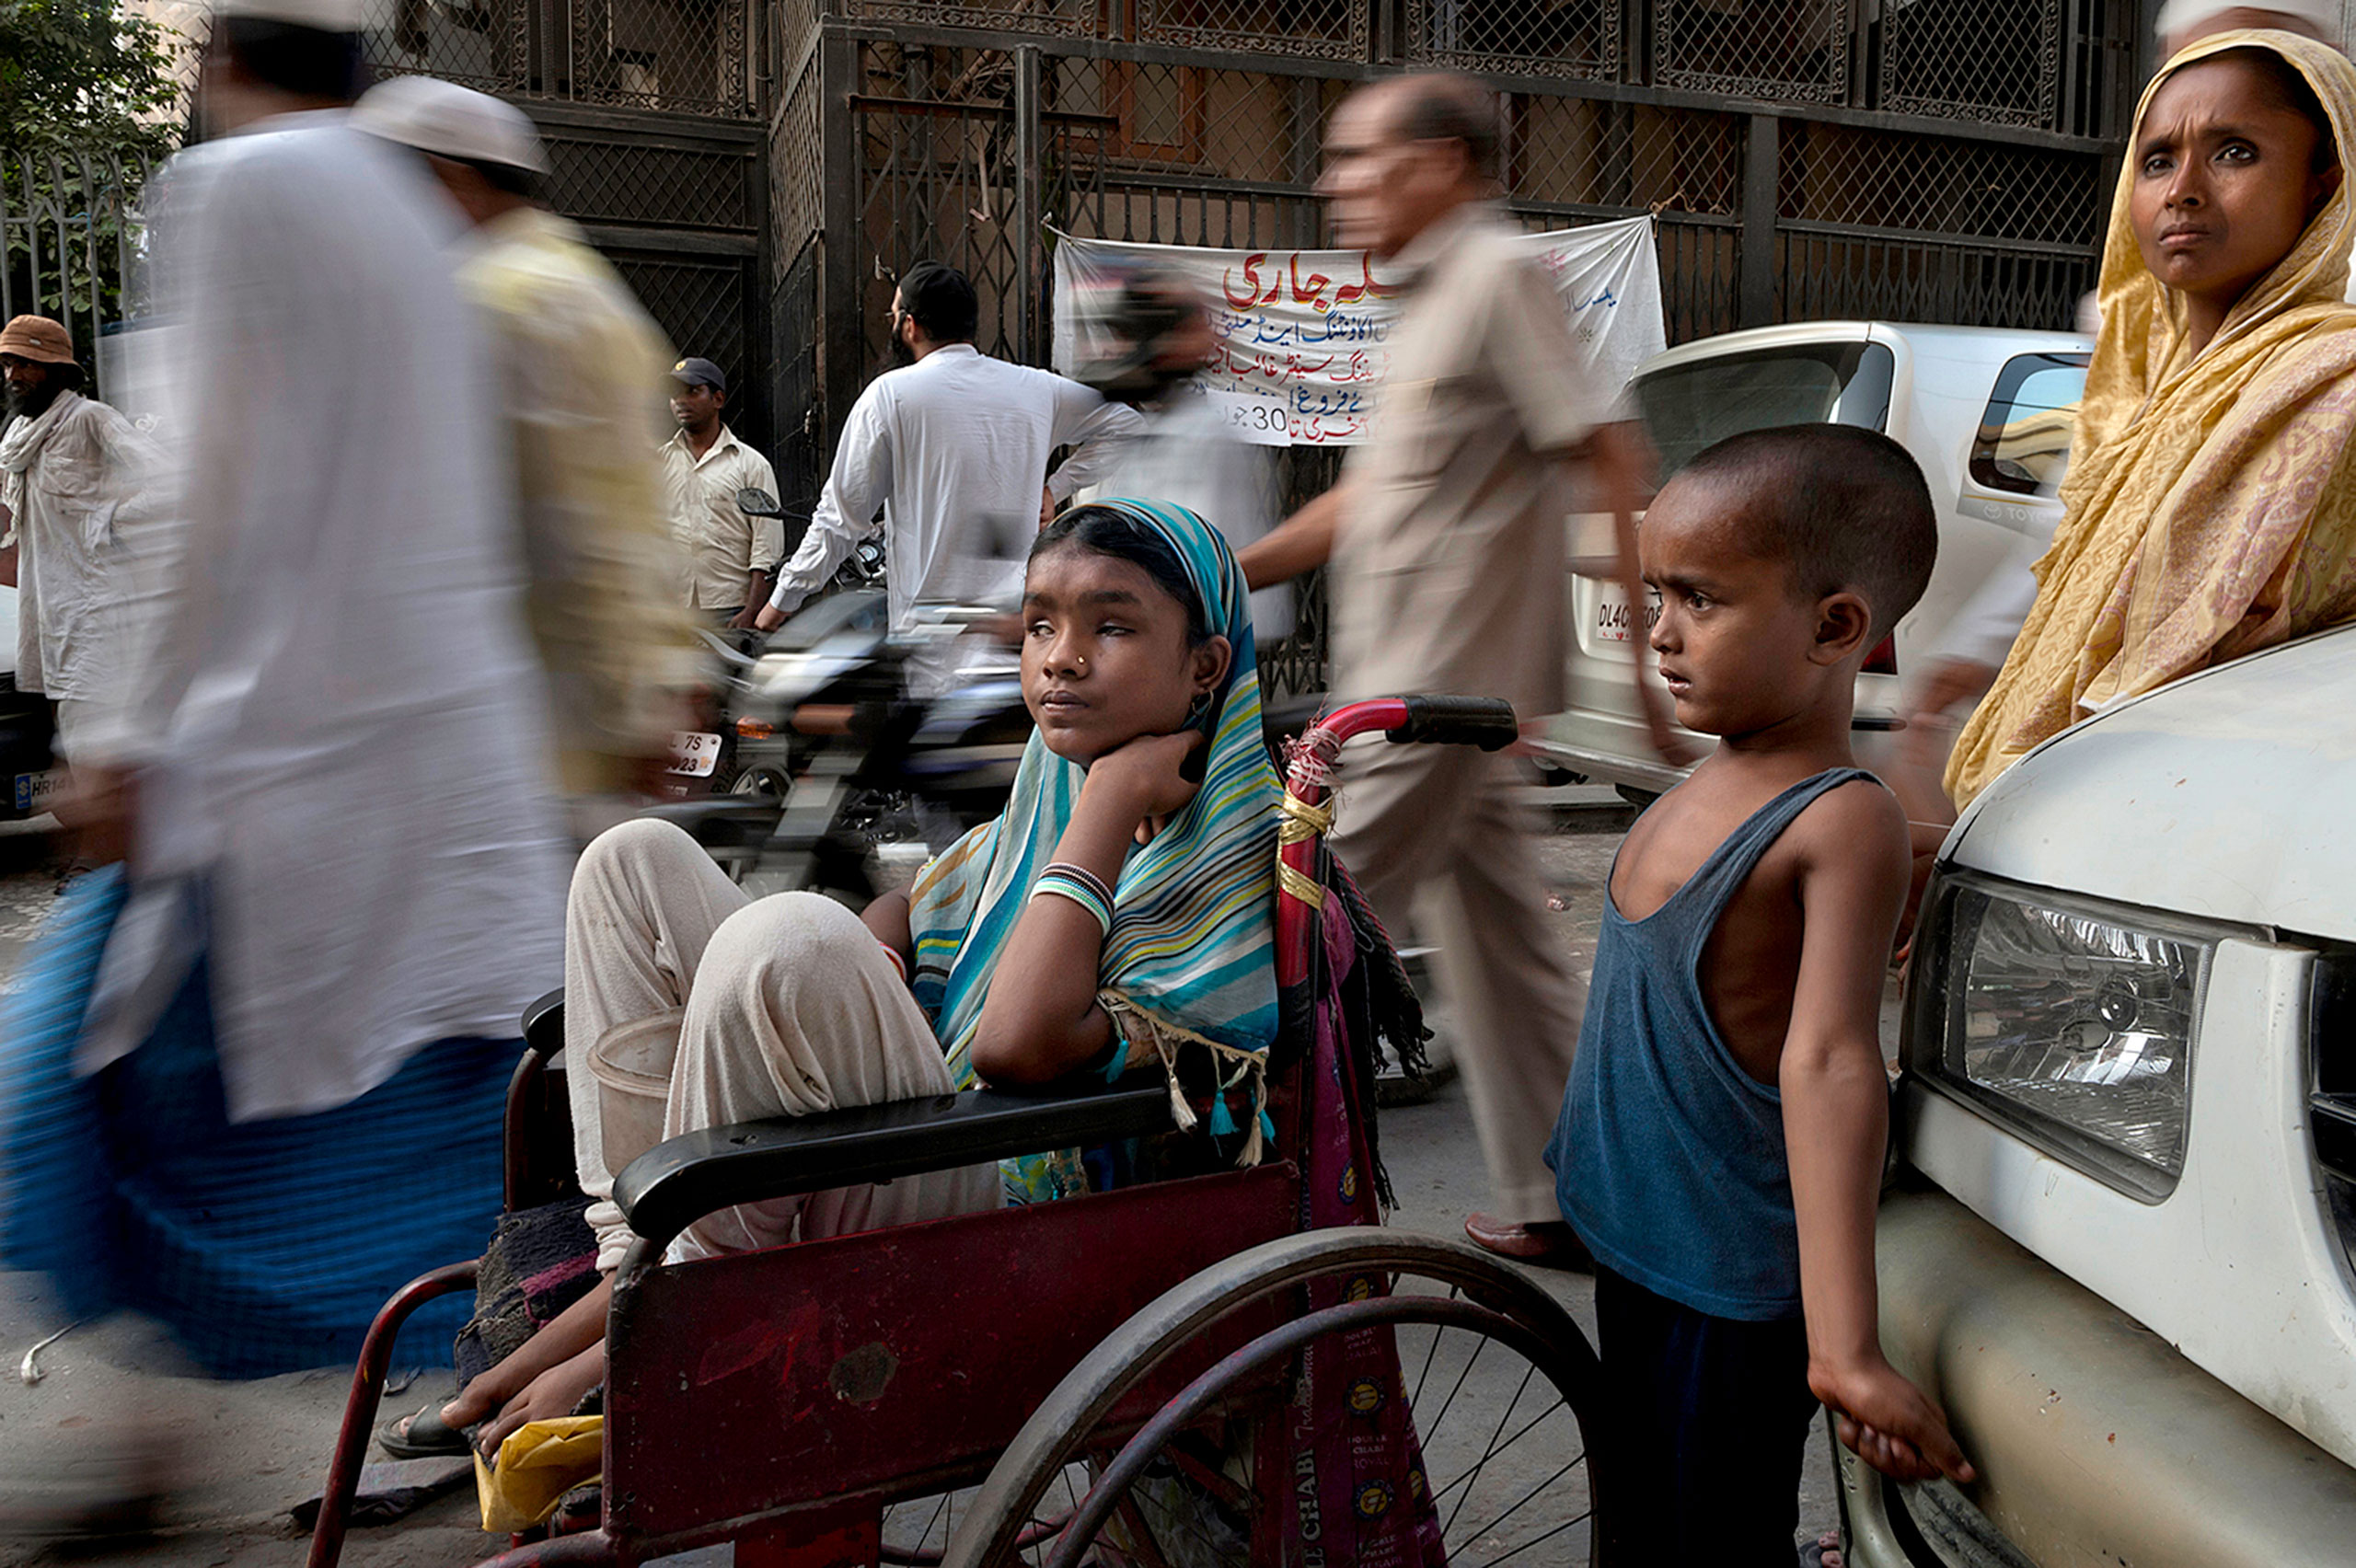 A sea of people passes by Hunupa Begum, 13, who has been blind for the past 10 years and lives close to the Nizamudin Bangala Masjid (Mosque) in New Delhi, India. She begs as the only source of income for her family that consist of a brother Hajimudin Sheikh, 6, center, who suffers fluids that accumulate in his head and her mother Manora Begum, 35, right, who suffers from Asthma, and she has a womb ailment and can't do manual labor. Their father Nizam Ali Sheikh died ten years ago of Tuberculosis. Her wheelchair was donated by a passerby.